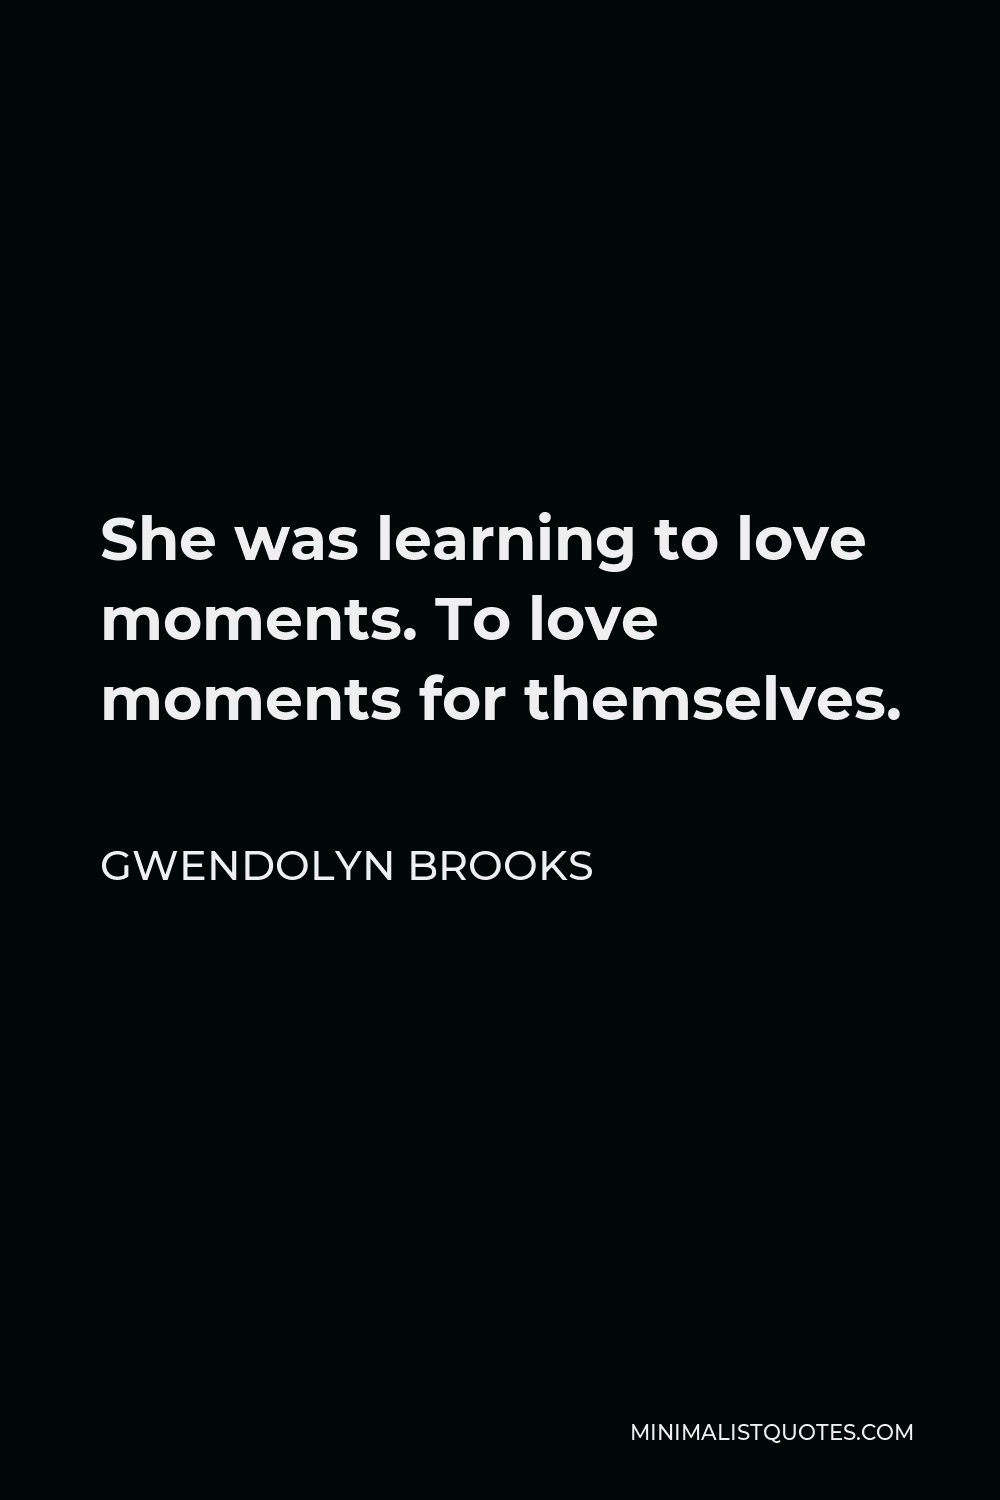 Gwendolyn Brooks Quote - She was learning to love moments. To love moments for themselves.